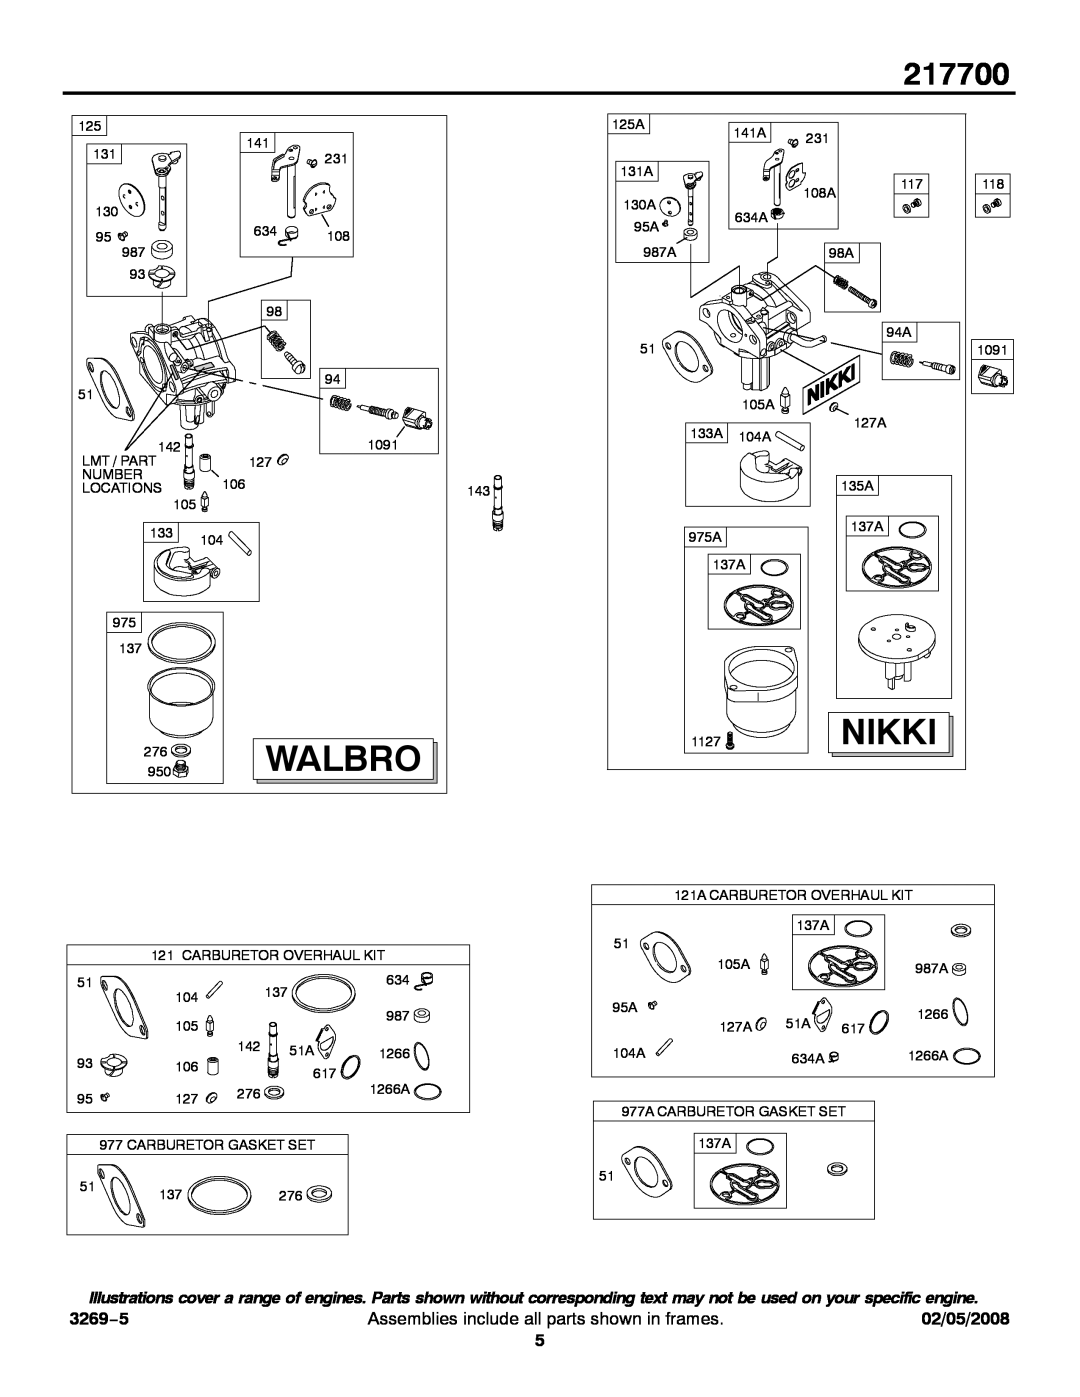 Briggs & Stratton 217700 service manual Walbro, Nikki, 3269−5, Assemblies include all parts shown in frames, 02/05/2008 